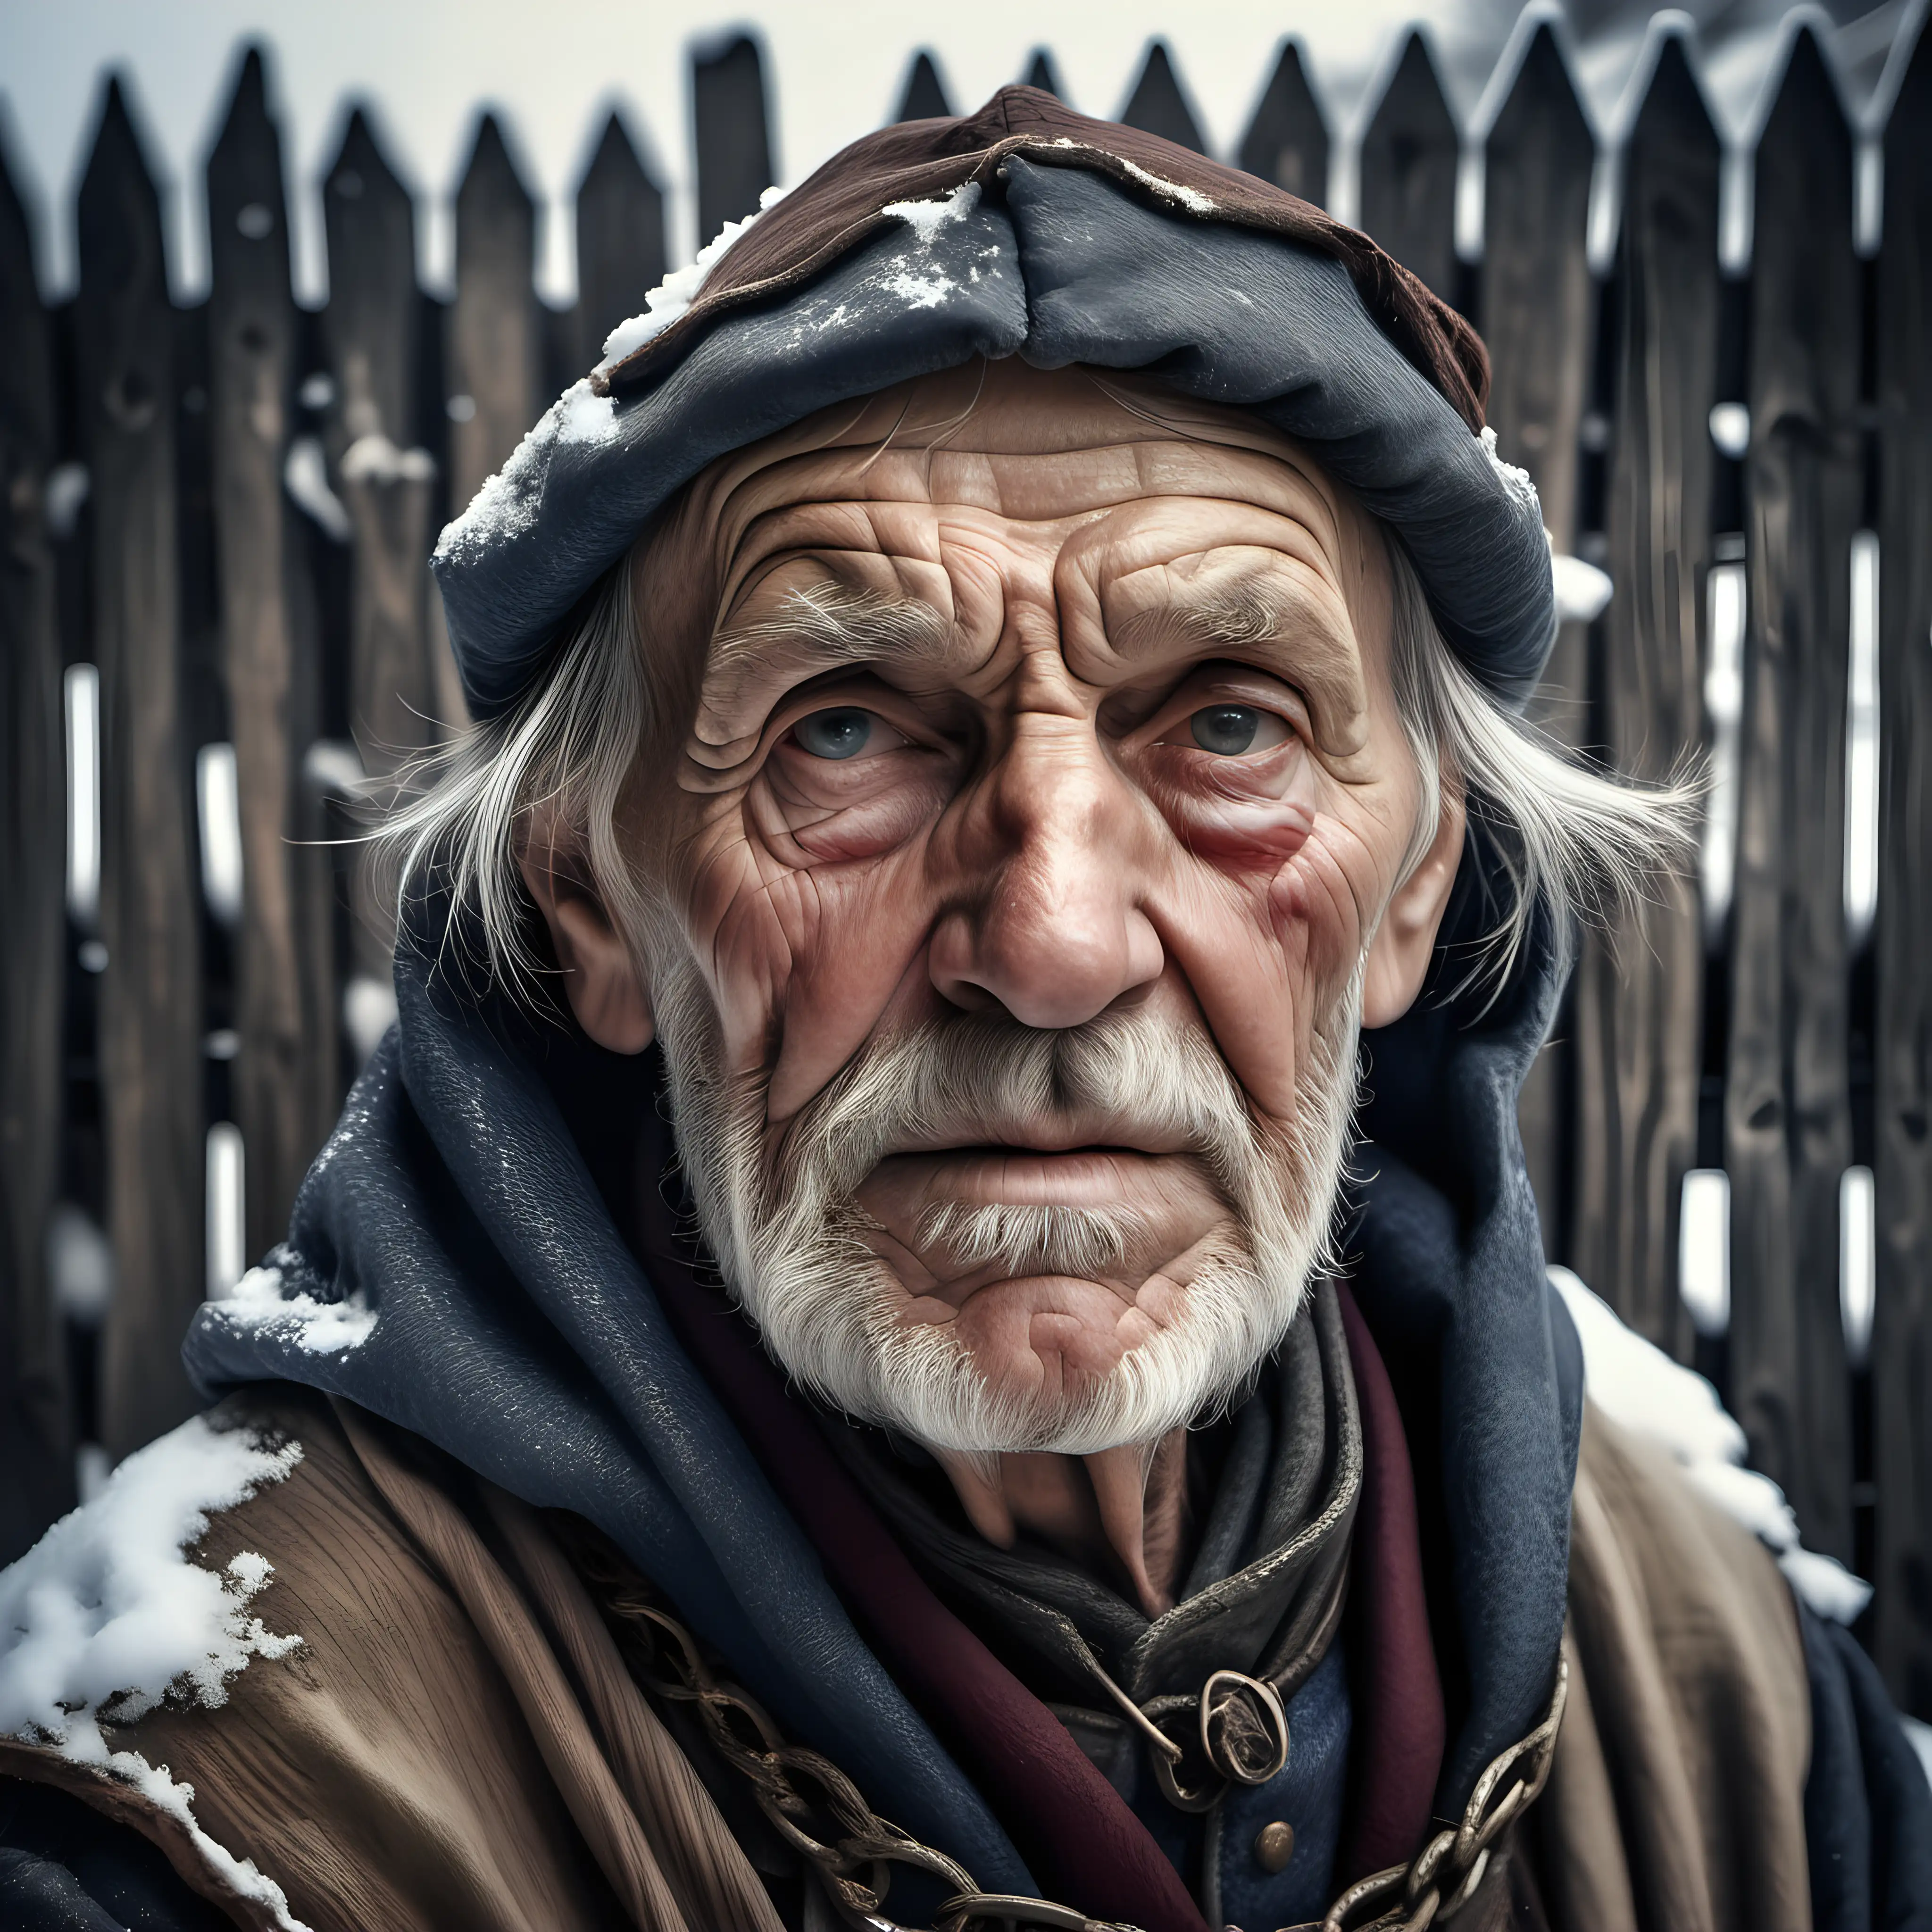 Photo lifelike Portrait of an elderly medieval merchant showcasing weathered facial features, the texture of his rugged clothing and the serene expression of a life spent at traveling, background a wooden snowy fence